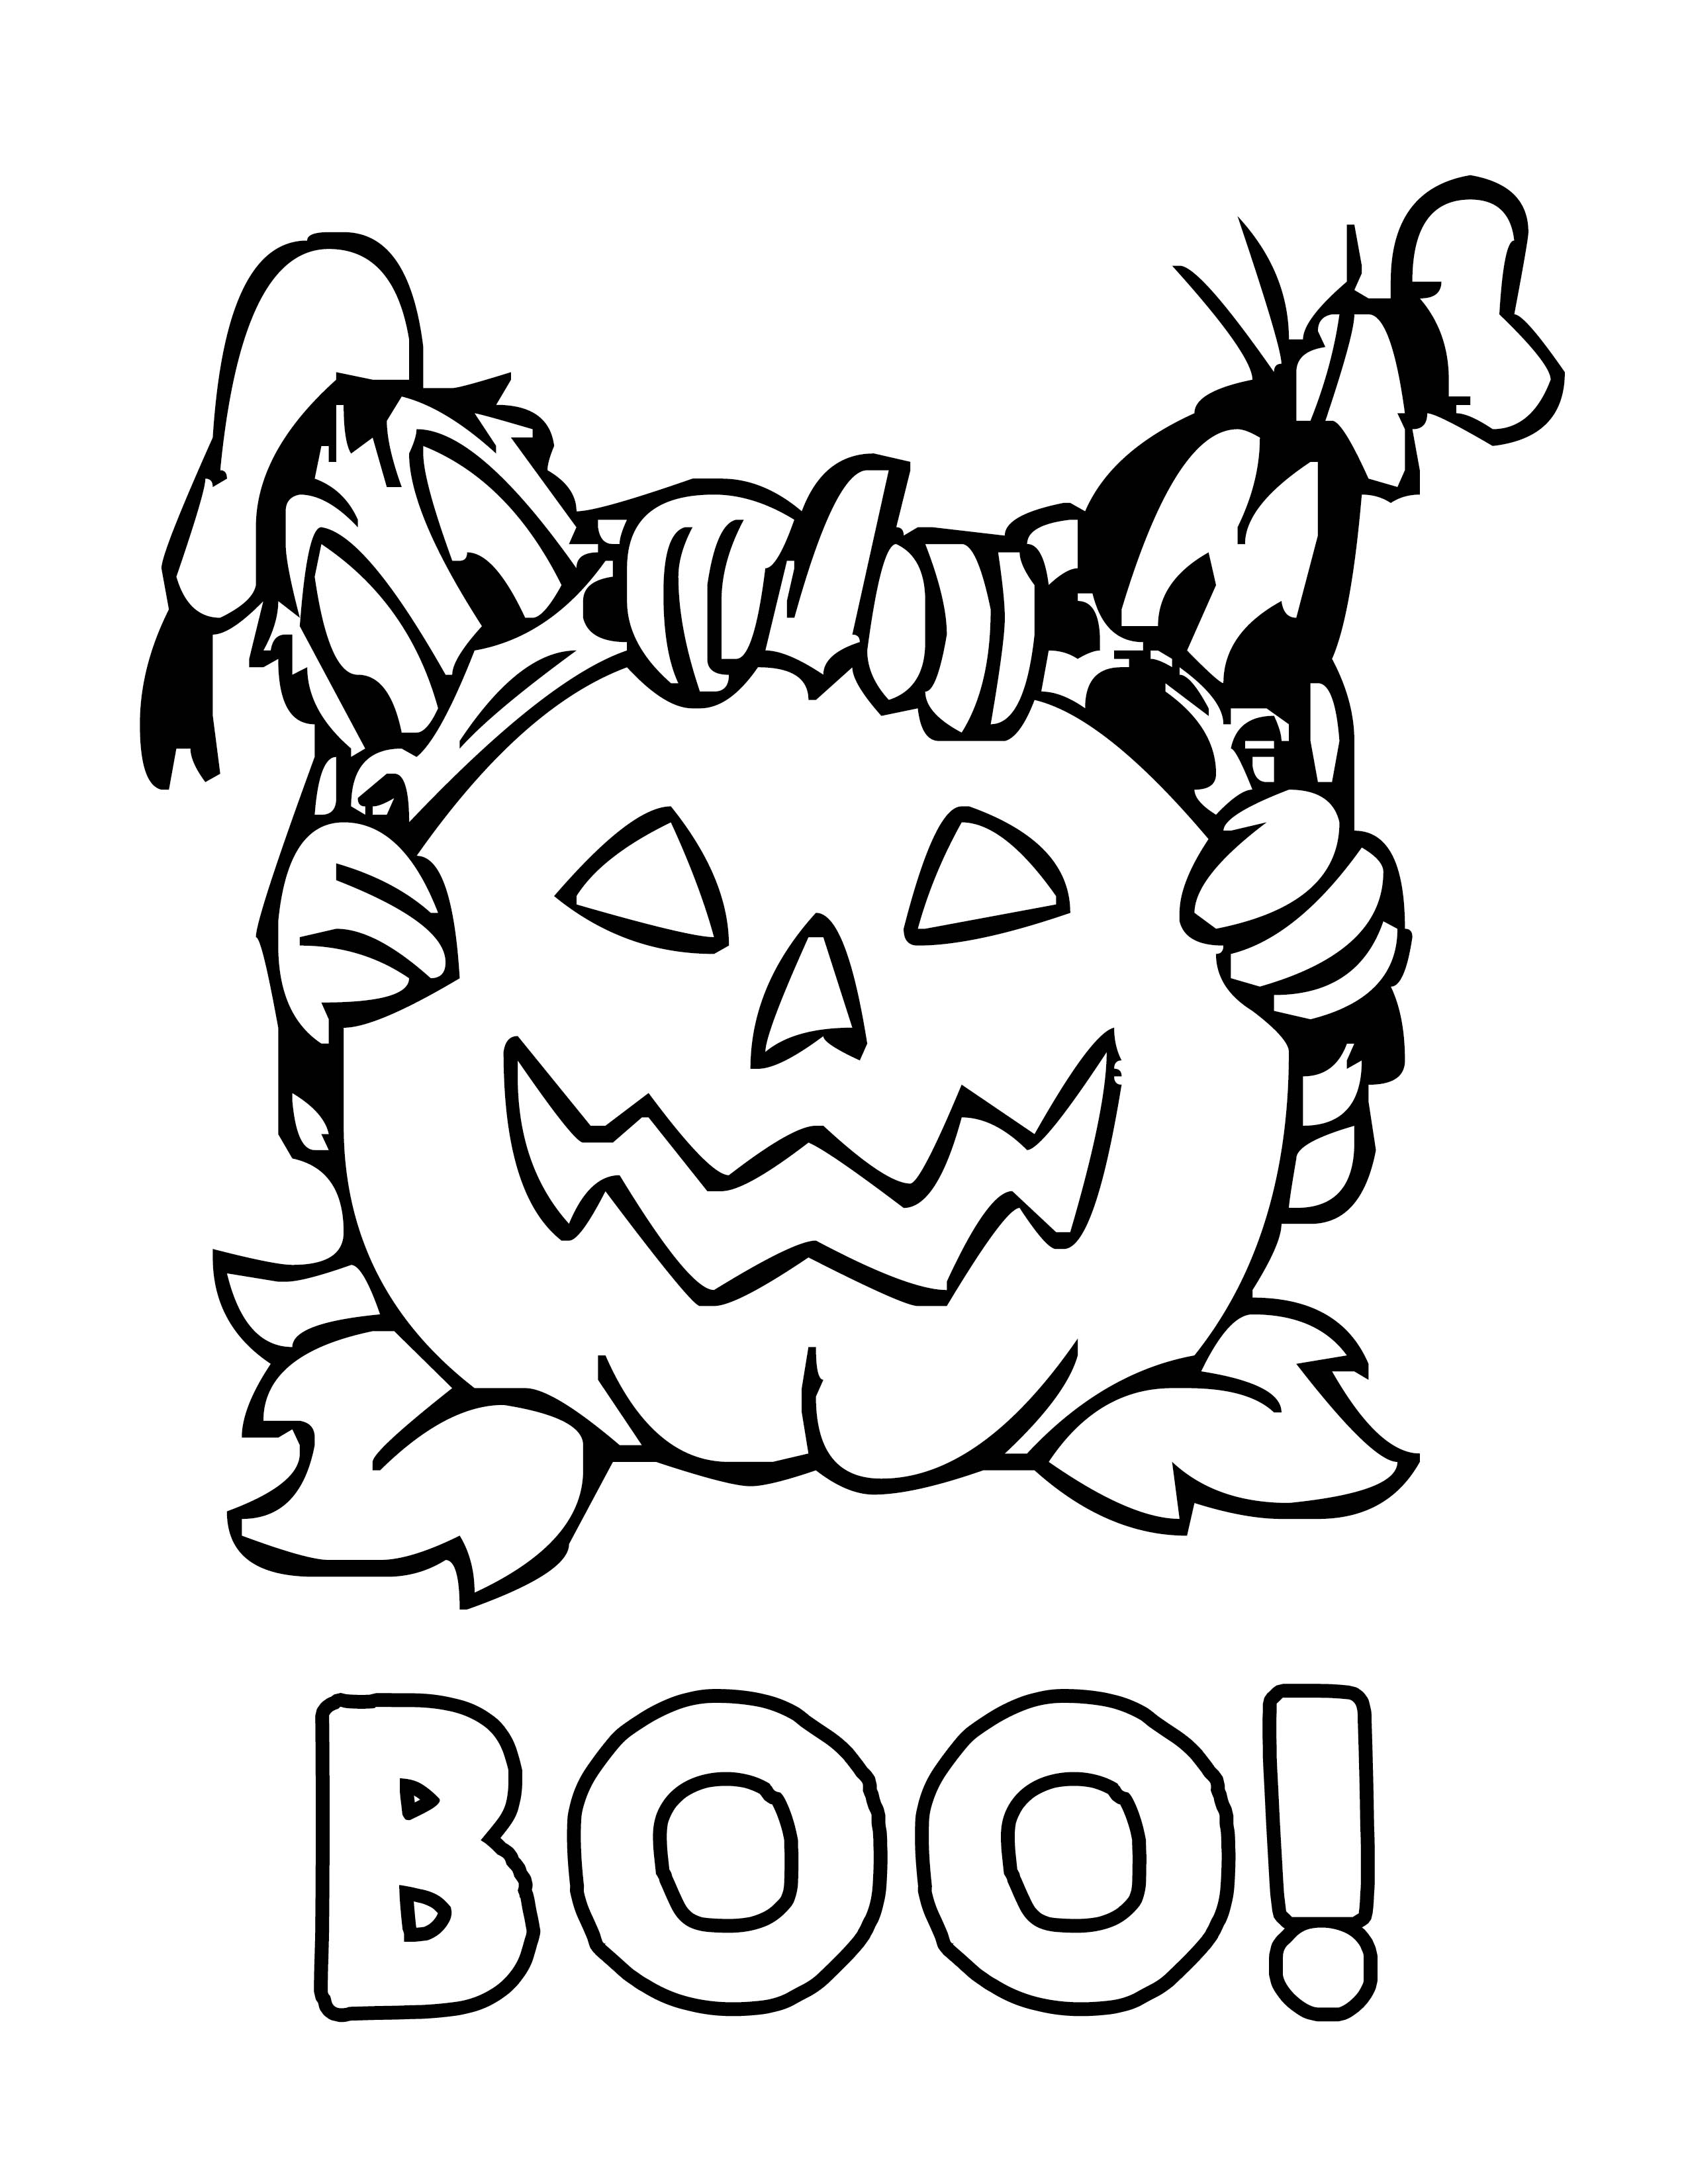 Halloween Coloring Pages -Disney Halloween- free printable coloring pages for kids - Misty Nelson @frostedevents